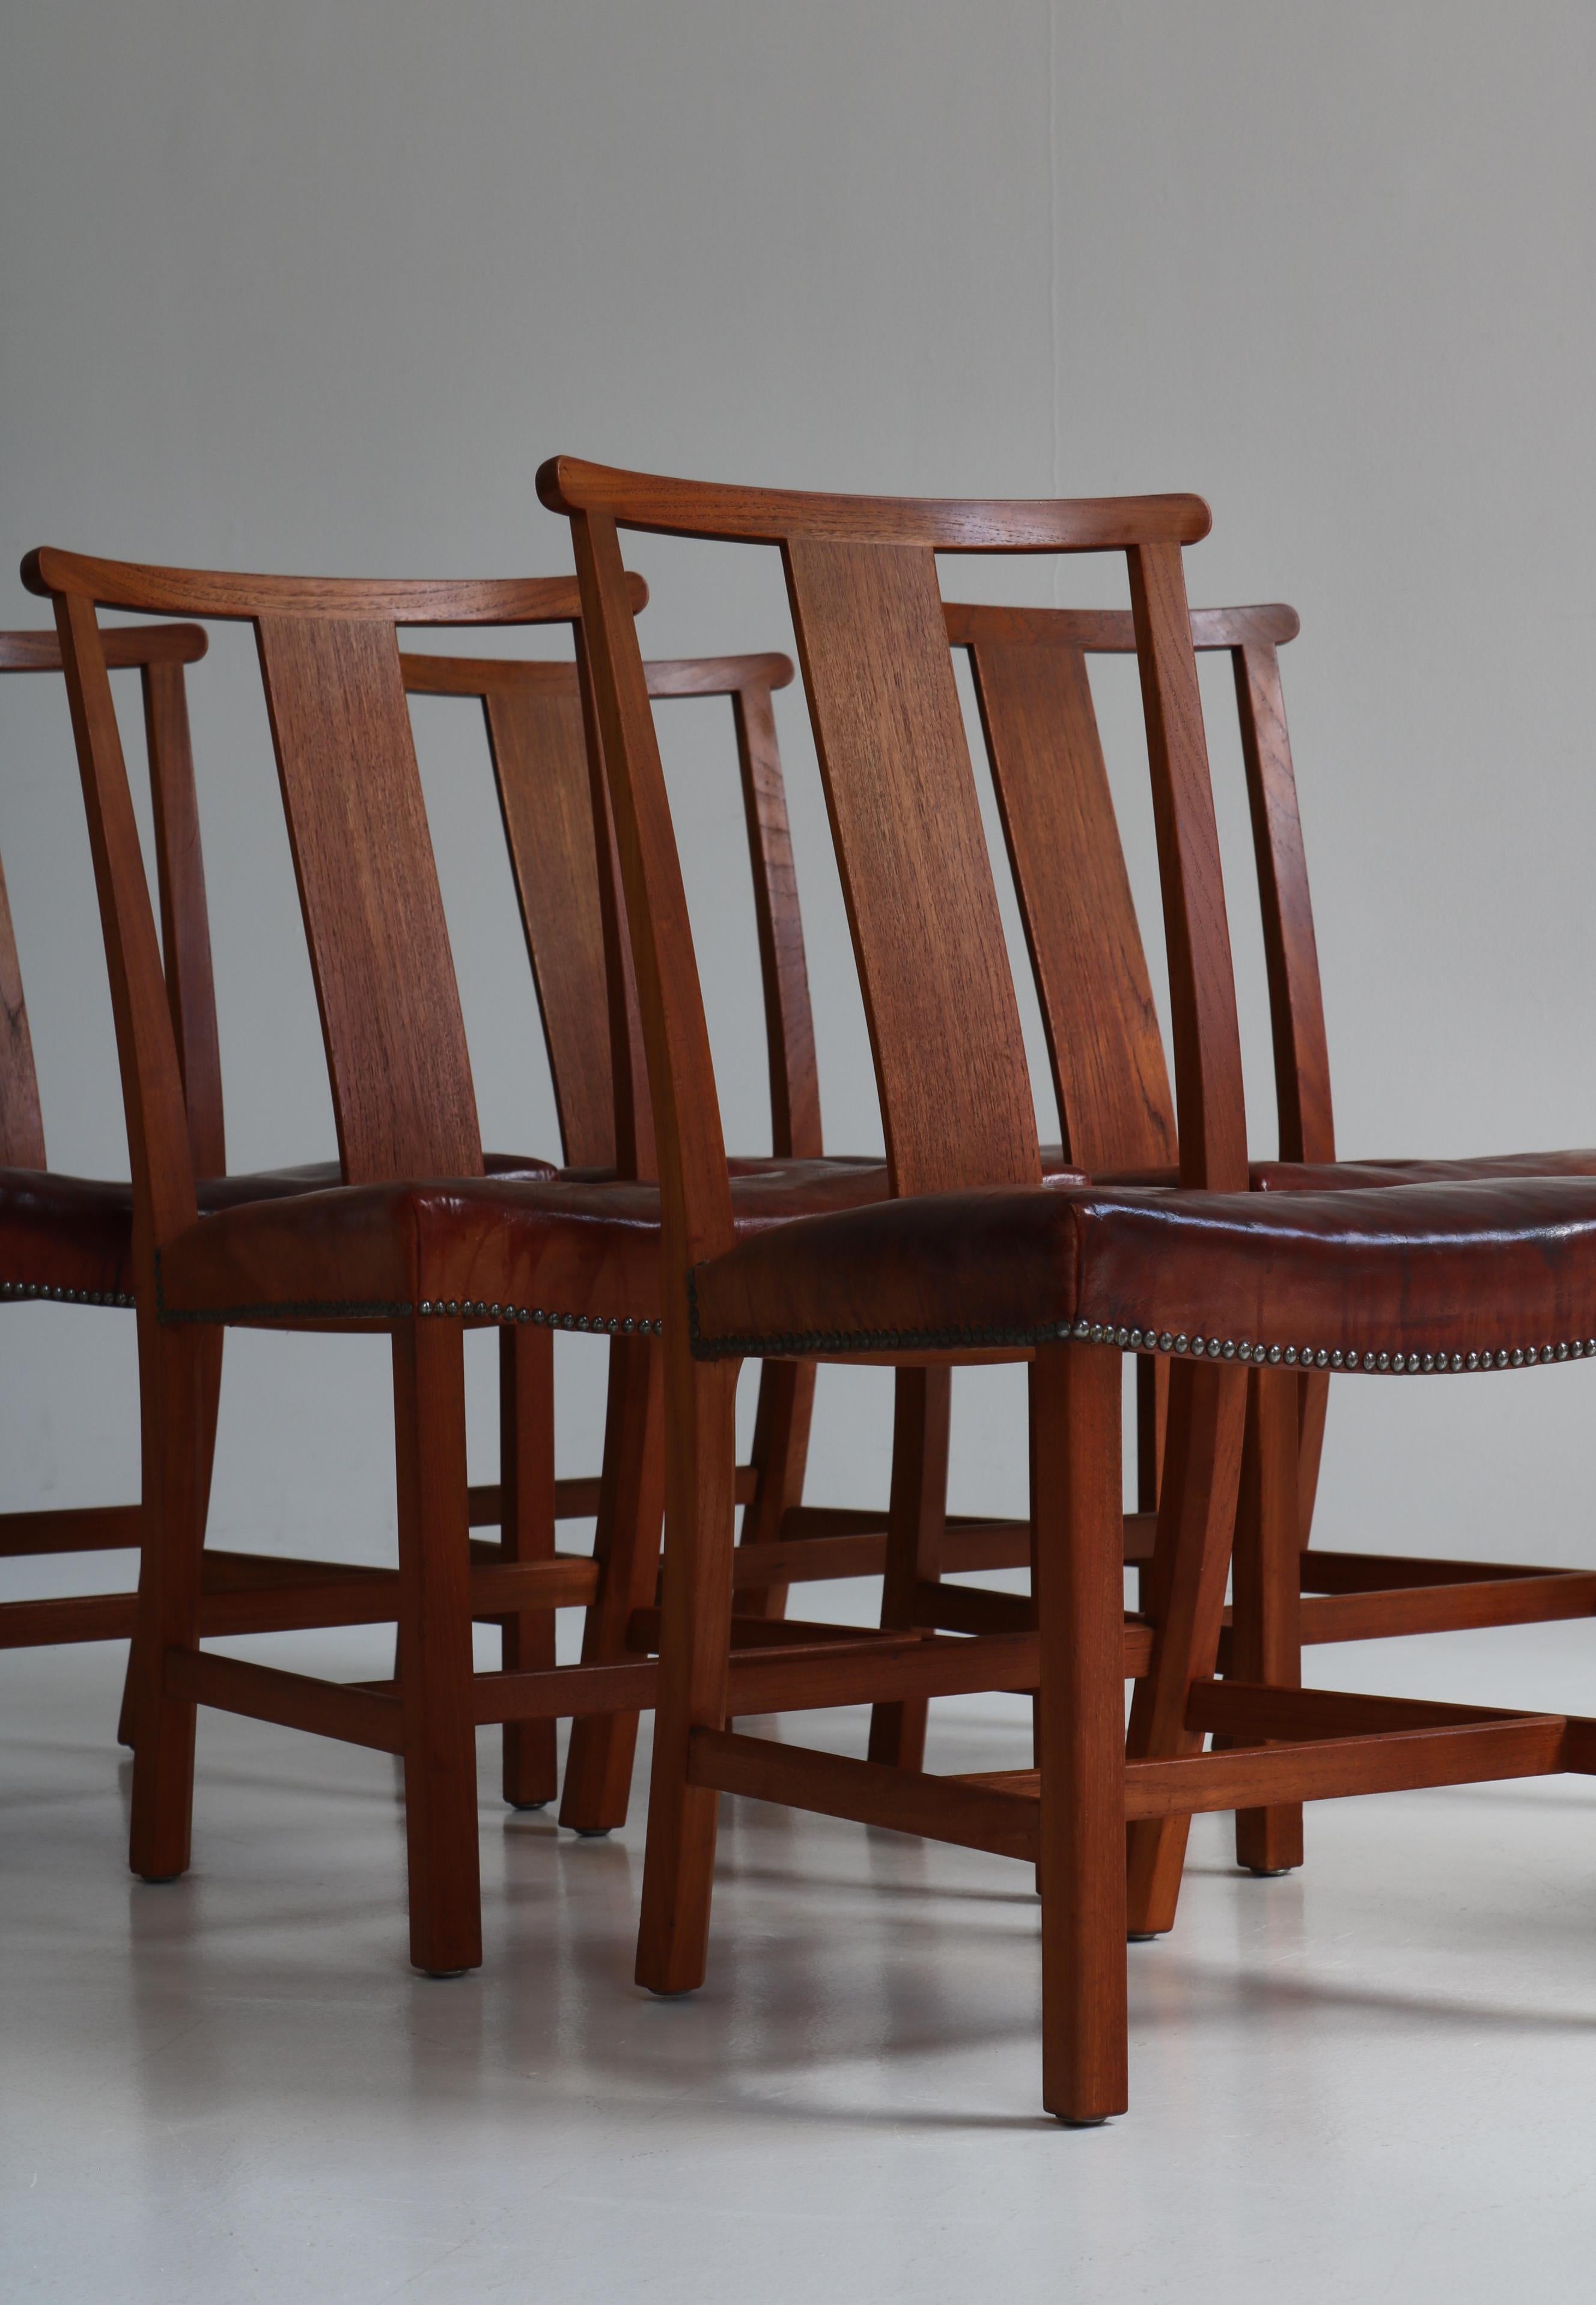 Set of Six Børge Mogensen Dining Chairs in Teak & Niger Leather, 1939, Denmark For Sale 2